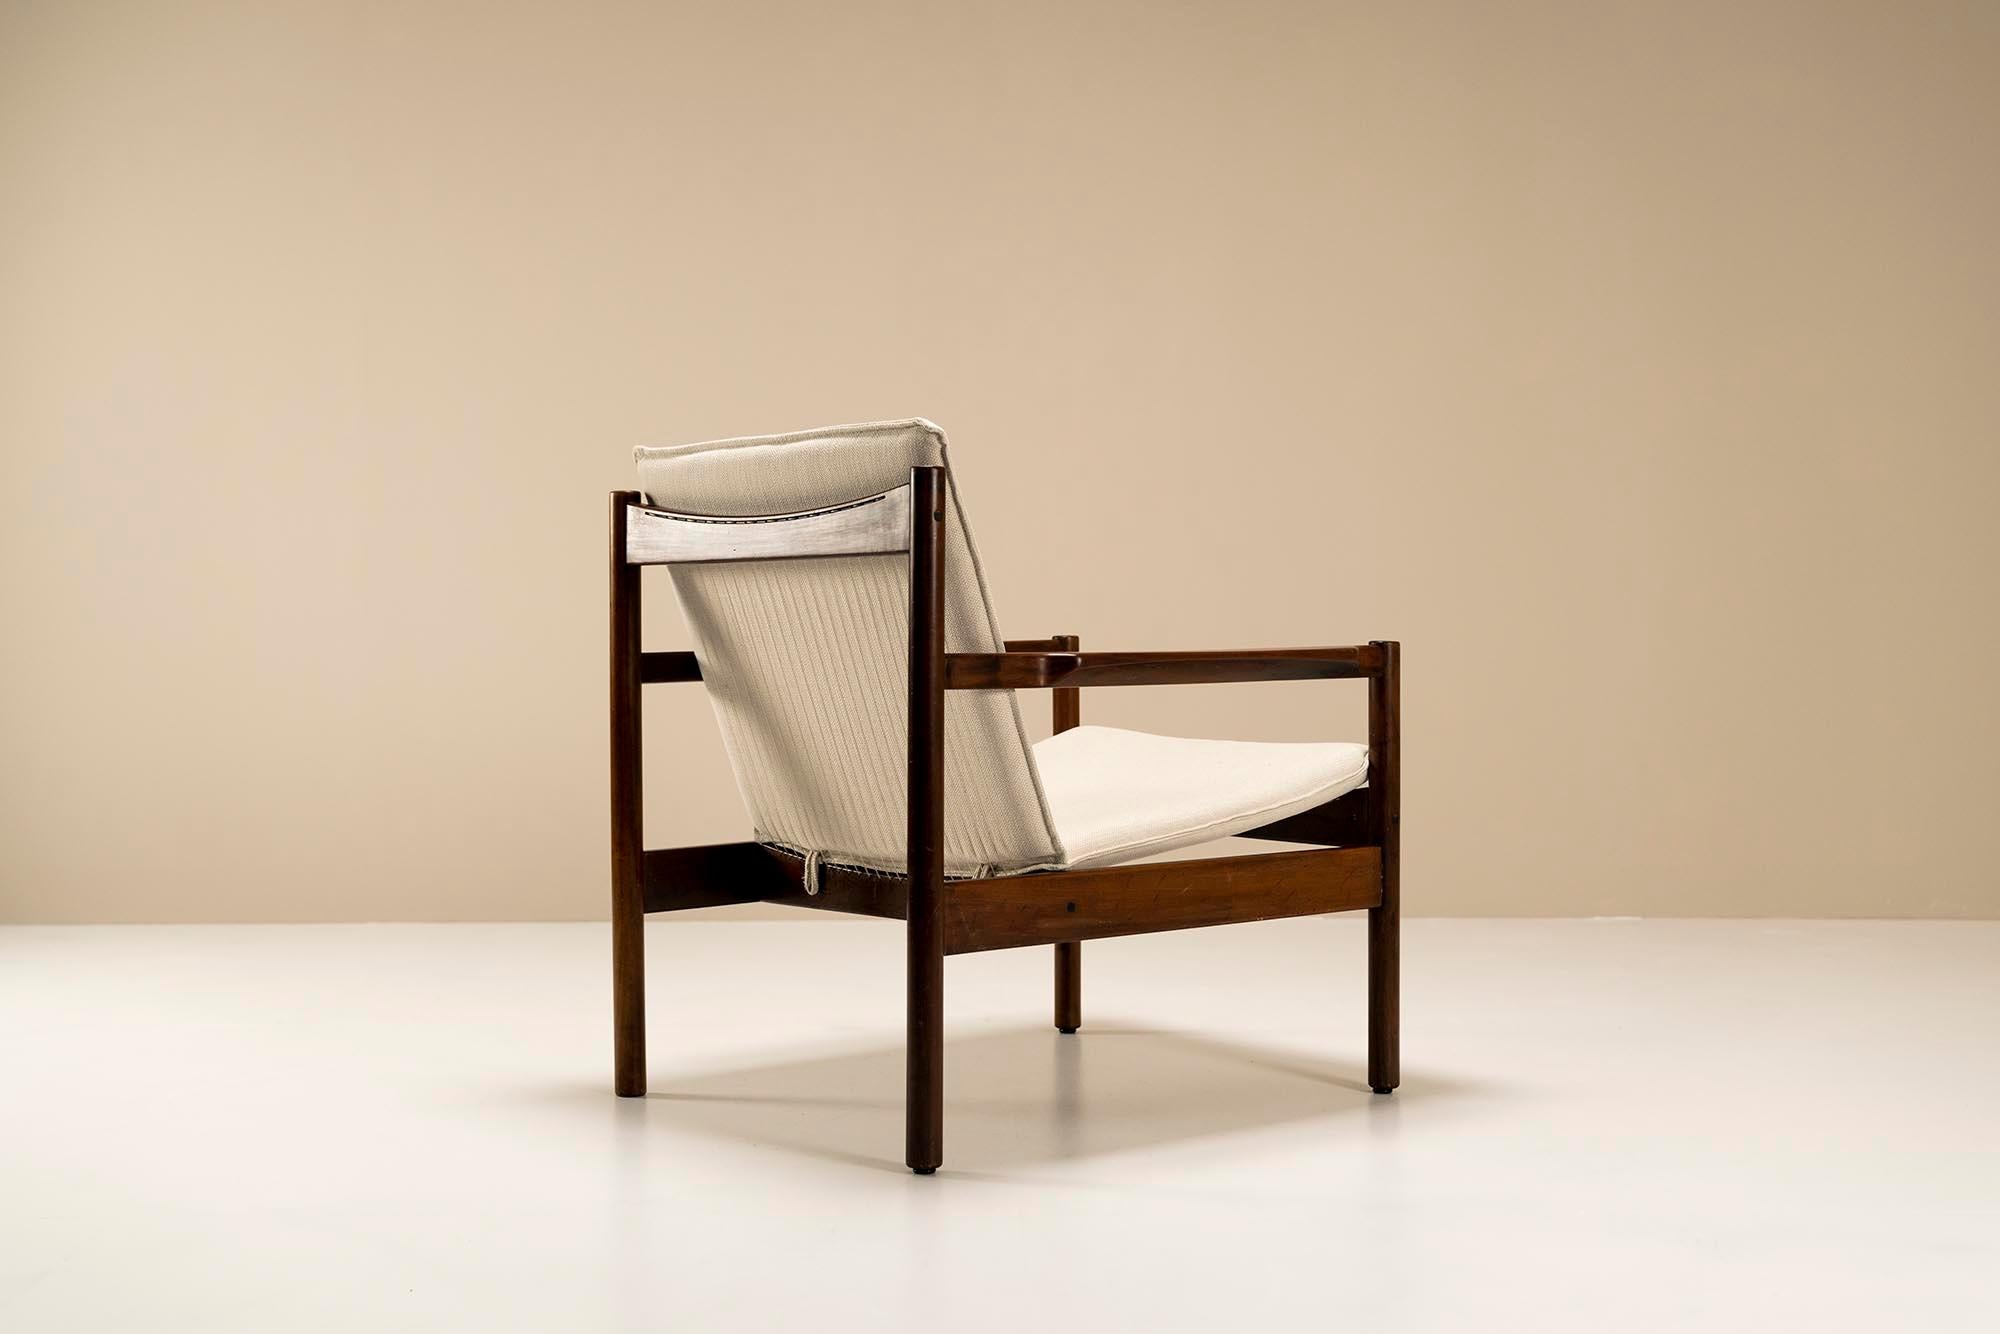 Upholstery Michel Arnoult Ouro Preto Lounge Chair in Imbuia Wood with Ottoman, Brasil 1958